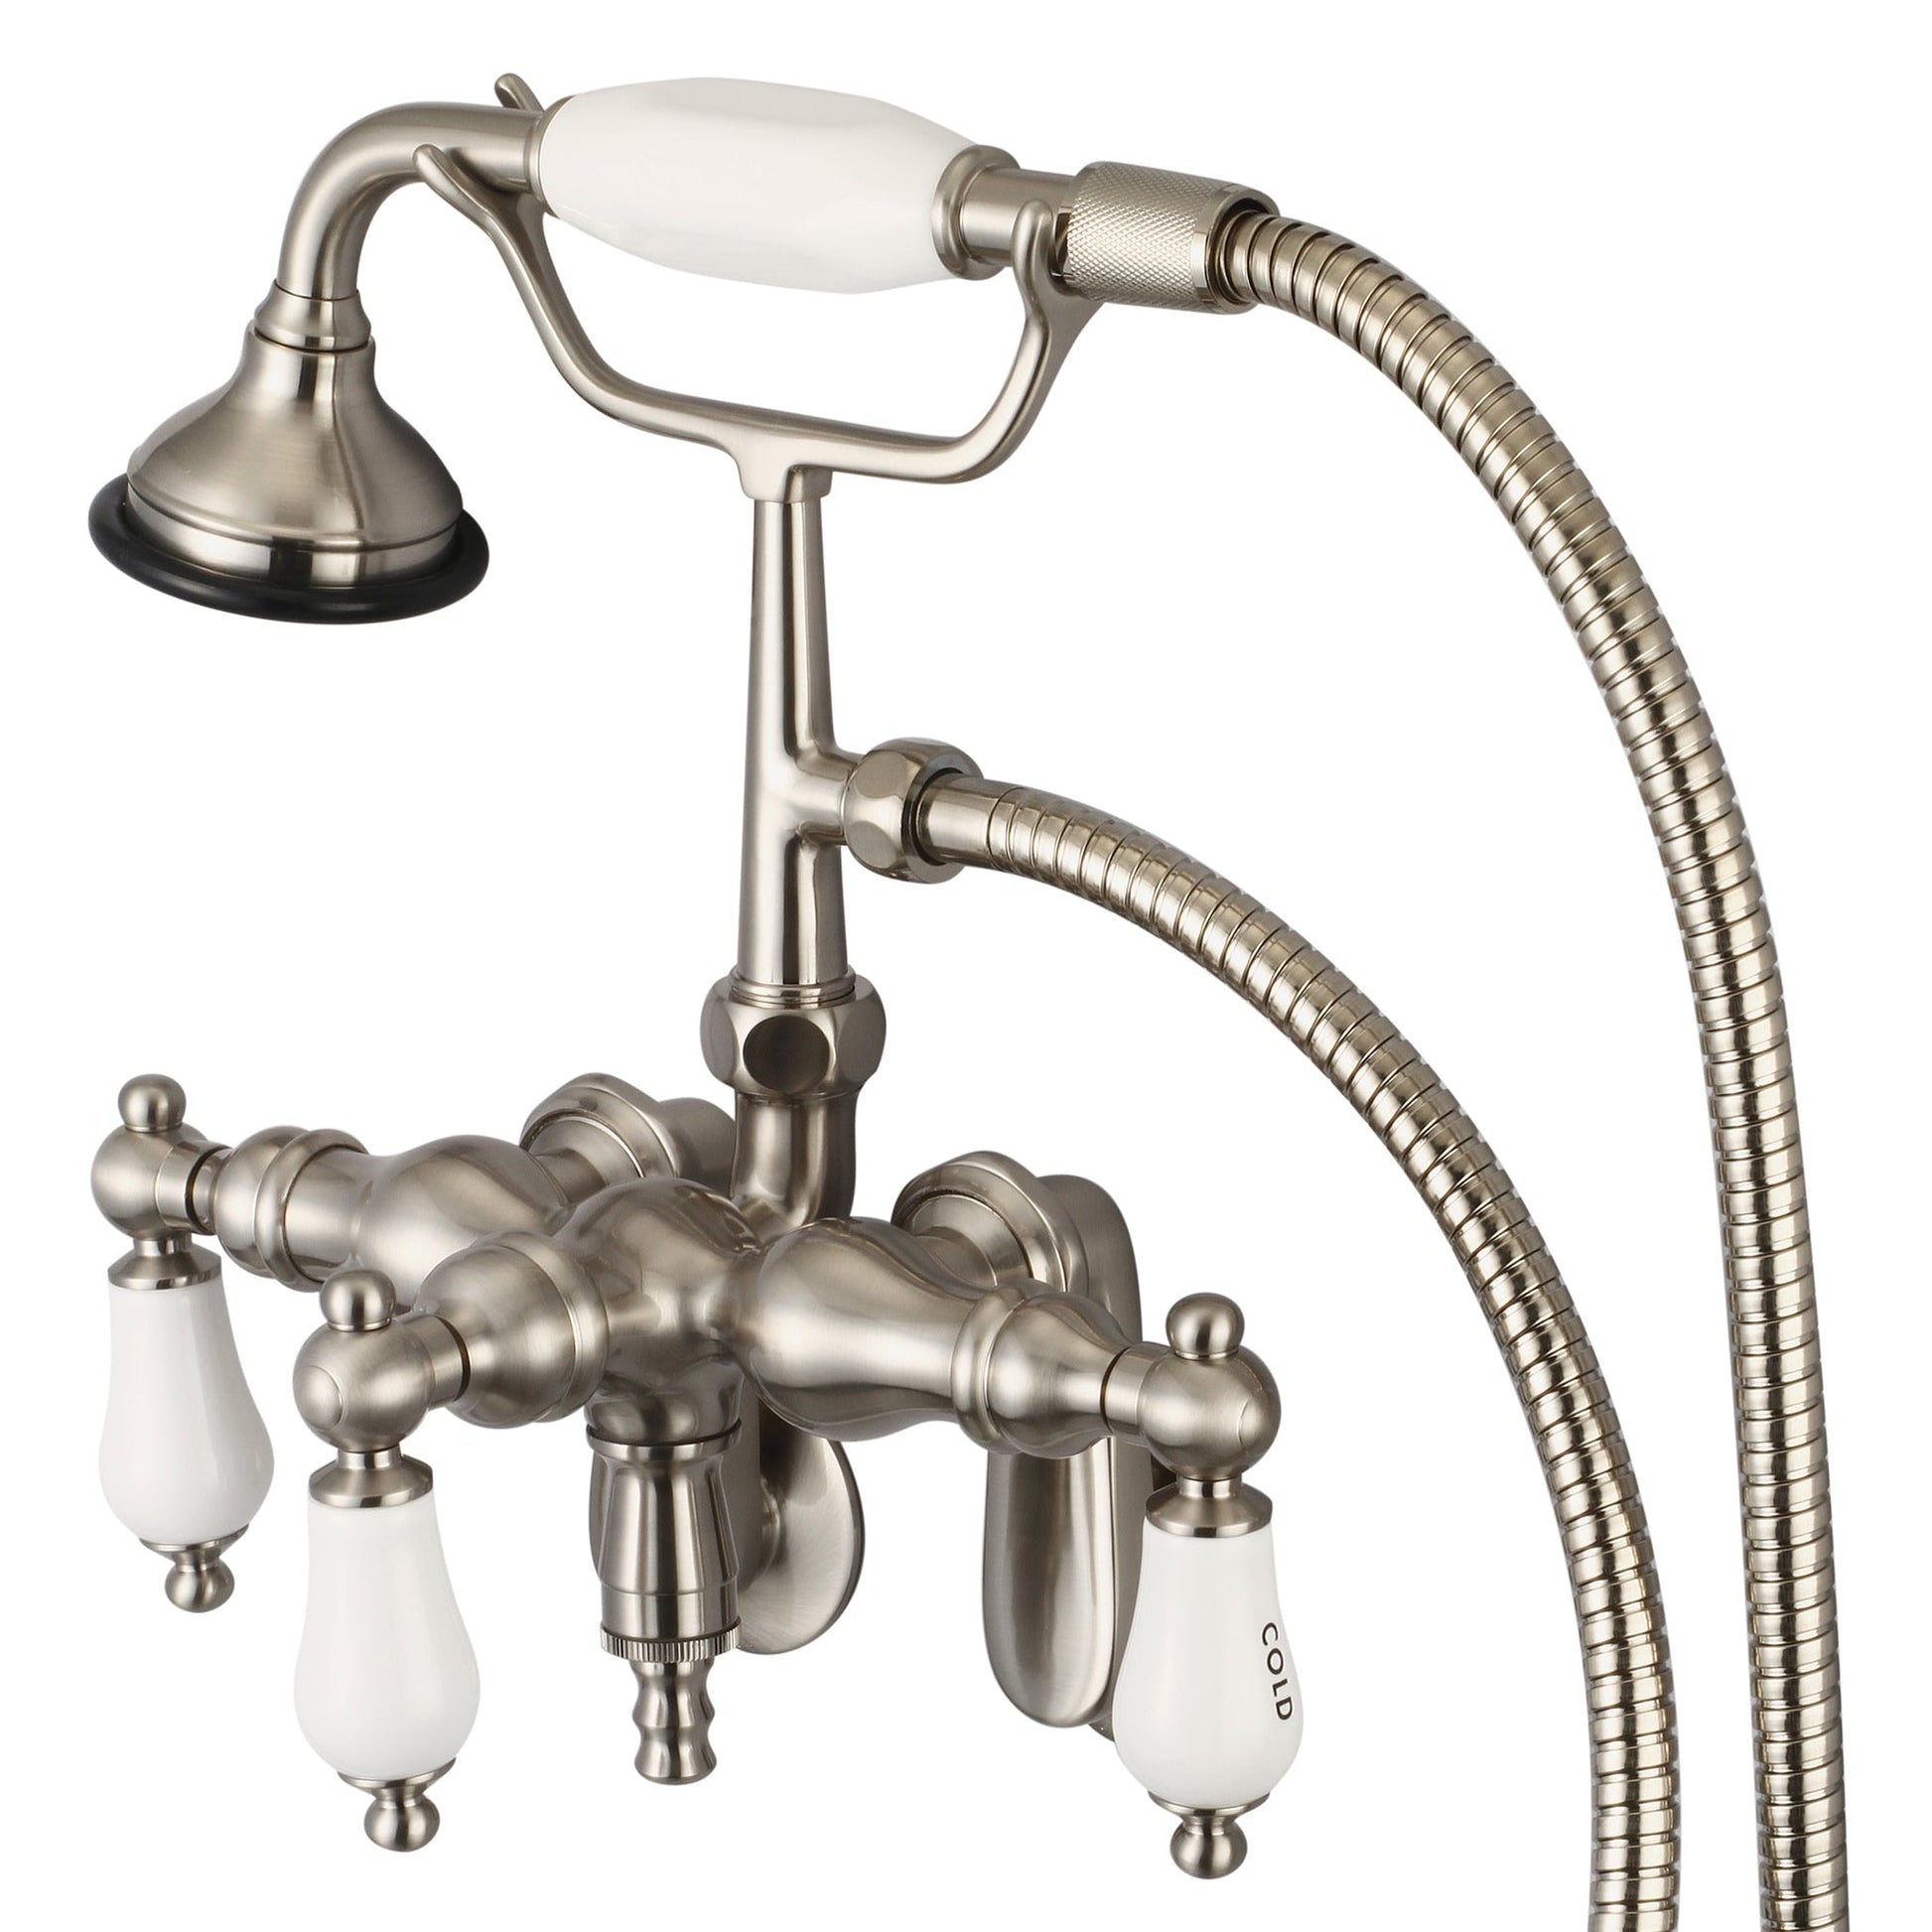 Water Creation Vintage Classic Center Wall Mount Tub F6-0018 9.25" Grey Solid Brass Faucet With Down Spout, Swivel Wall Connector And Handheld Shower And Porcelain Lever Handles, Hot And Cold Labels Included